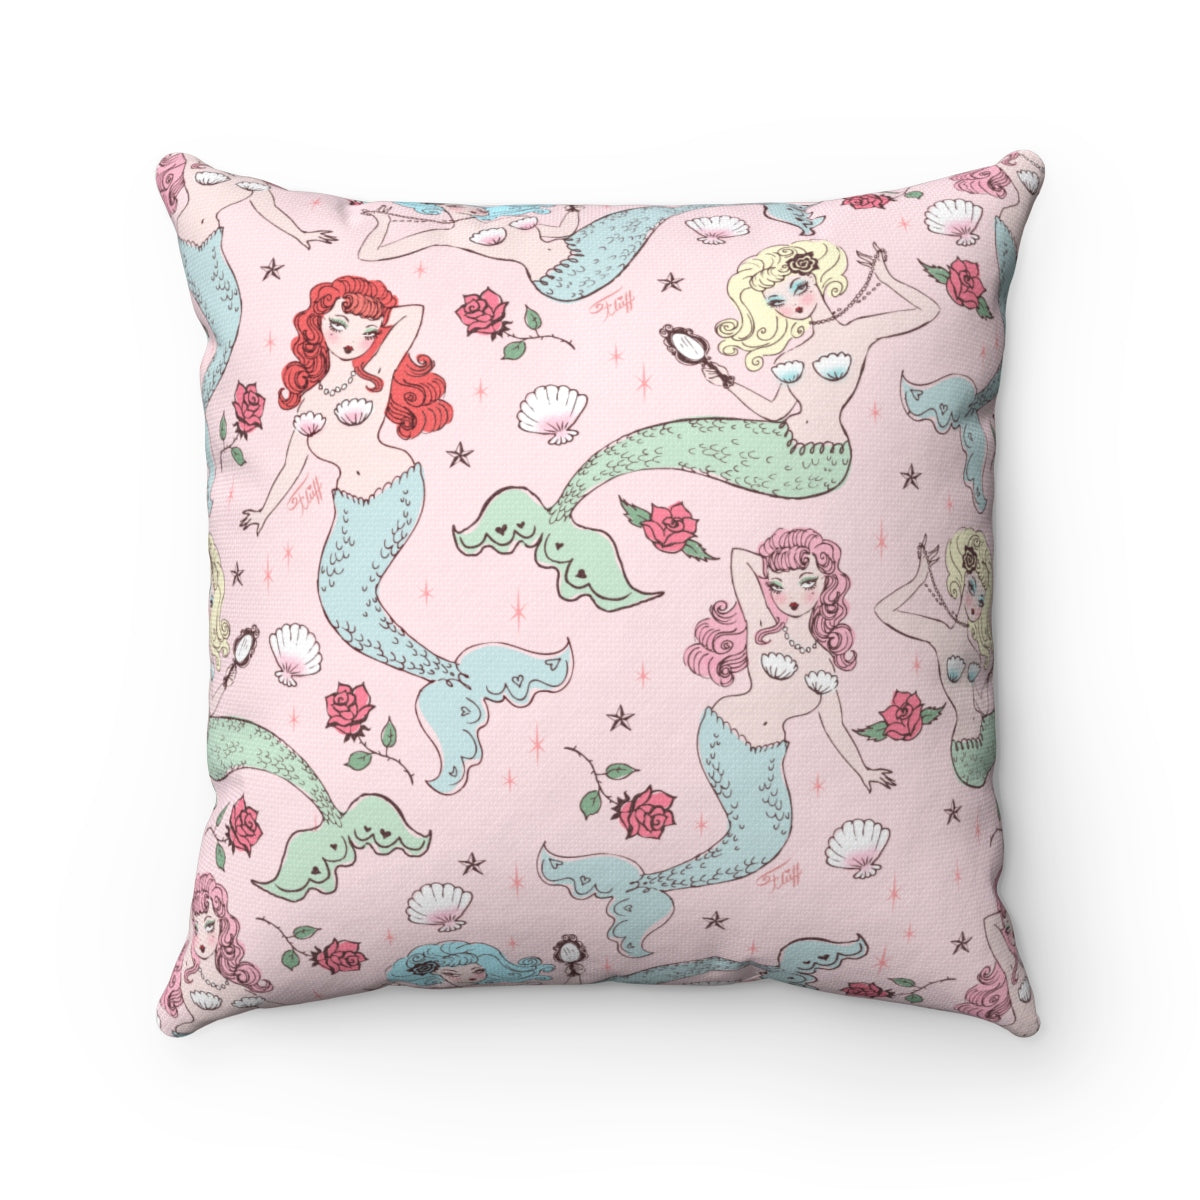 Mermaids and Roses on Pink • Square Pillow